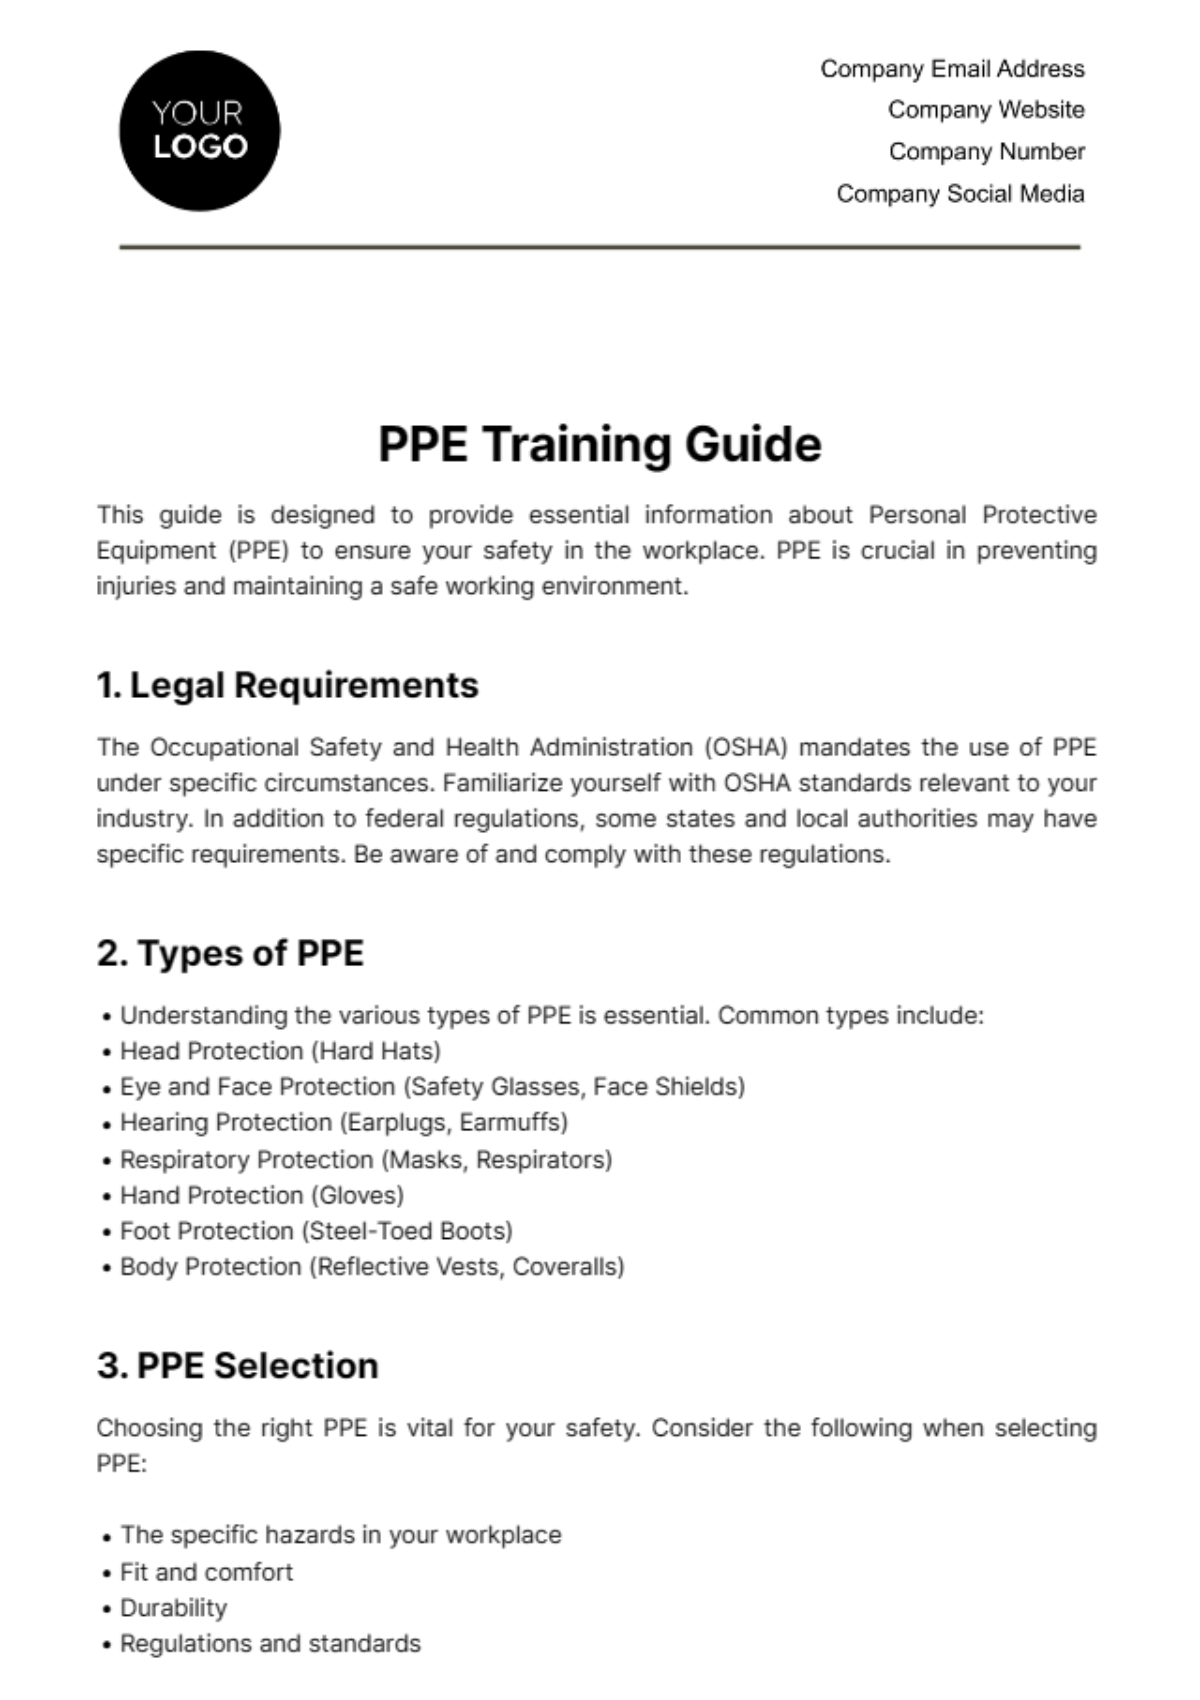 PPE Training Guide Template